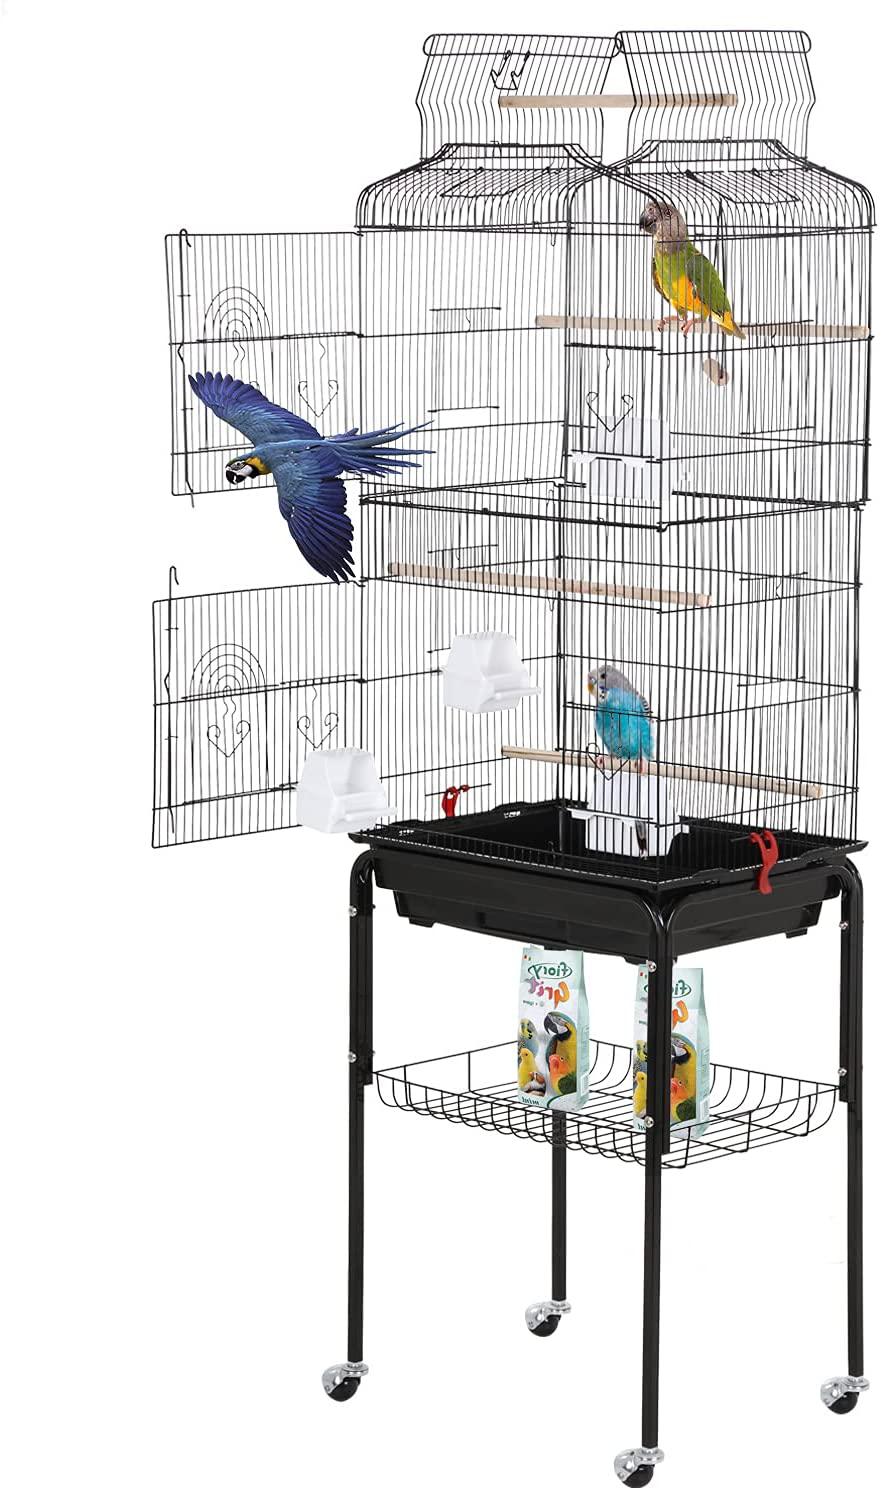 Bestpet 64 Inch Wrought Iron Bird Cage for Parakeets Medium Small Parrots Parakeet Cage with Detachable Rolling Stand & Play Open Top for Cockatiels Lovebird Finches Canaries Animals & Pet Supplies > Pet Supplies > Bird Supplies > Bird Cages & Stands BestPet BLACK  